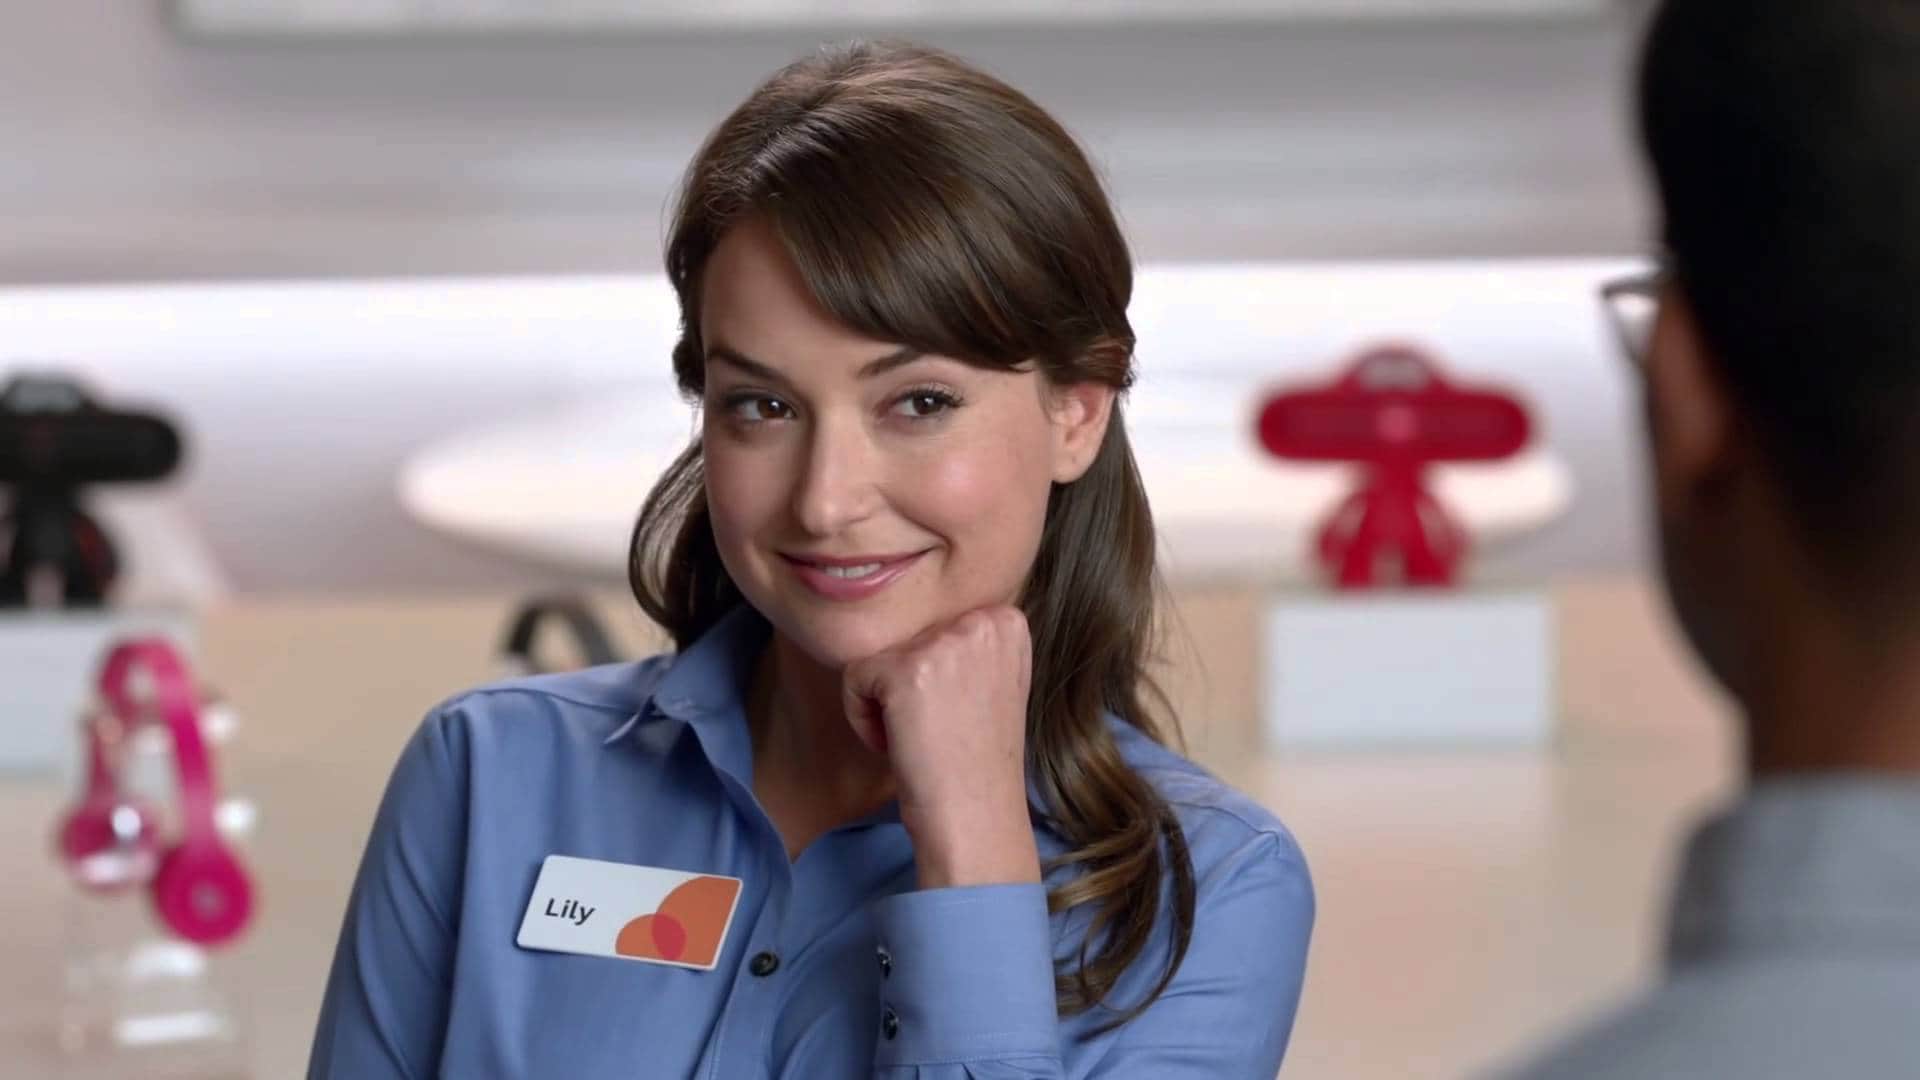 Milana Vayntrub Things To Know About The Actress, AKA Lily from AT&T